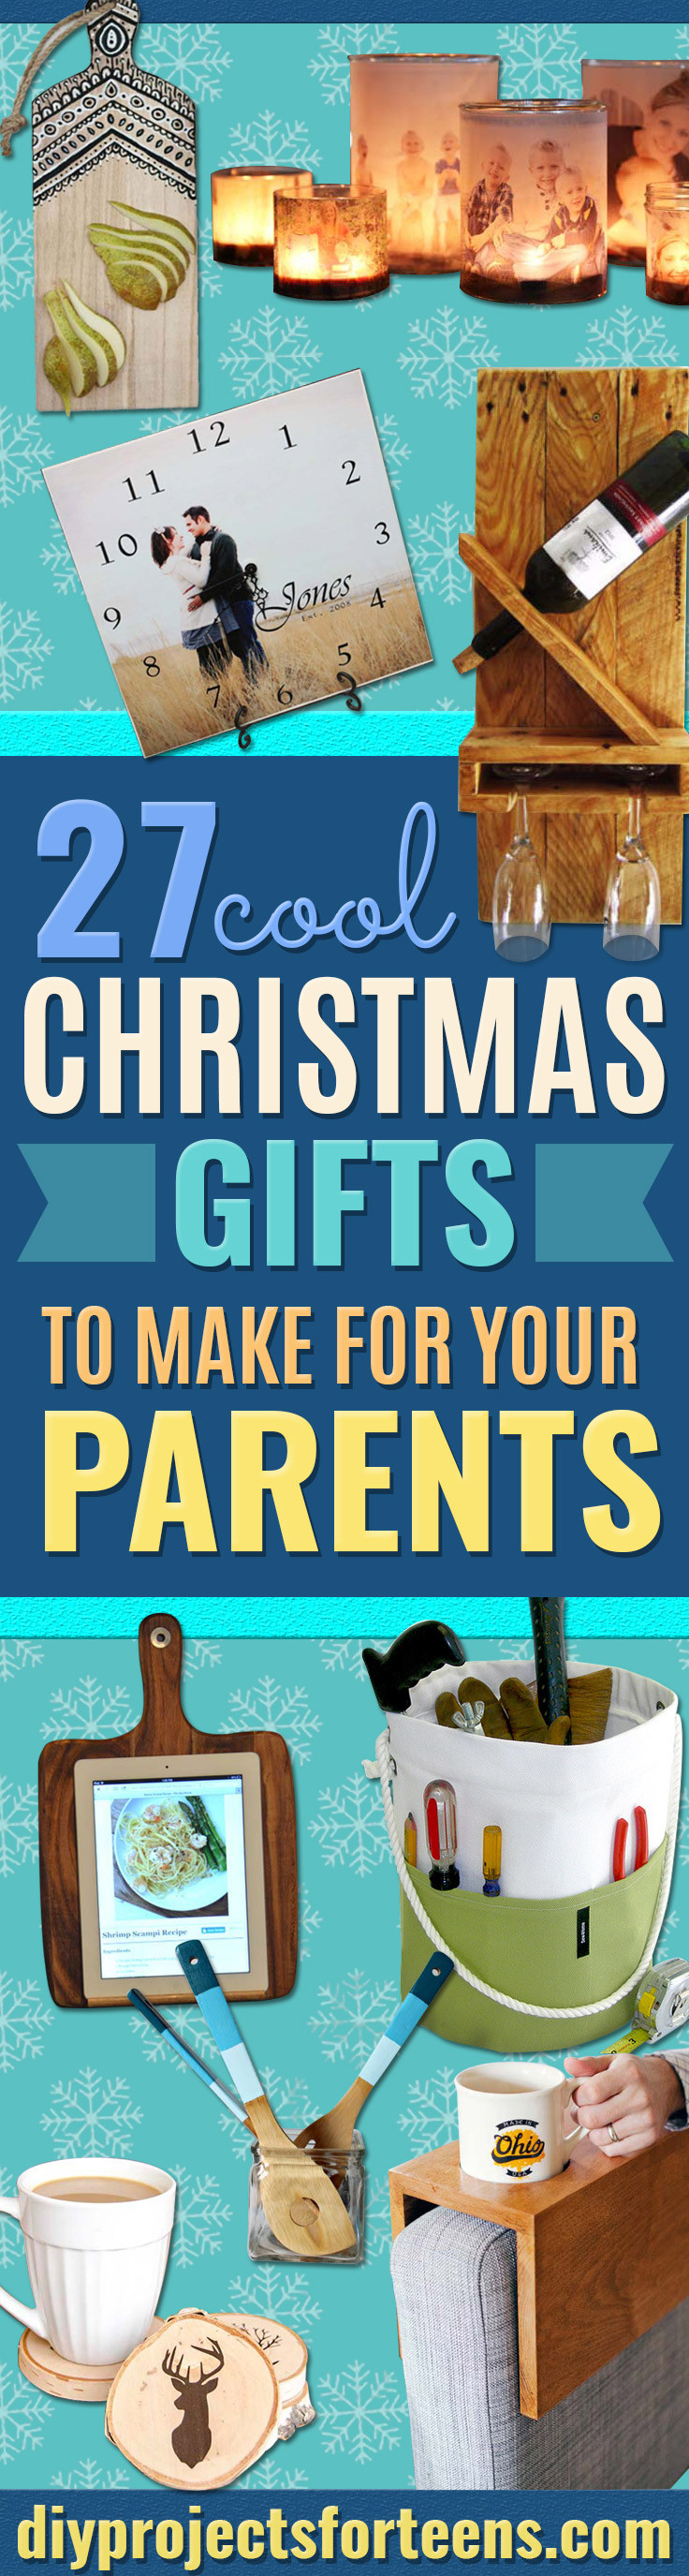 Christmas Gift Ideas For Mom And Dad
 Cool Christmas Gifts To Make For Your Parents